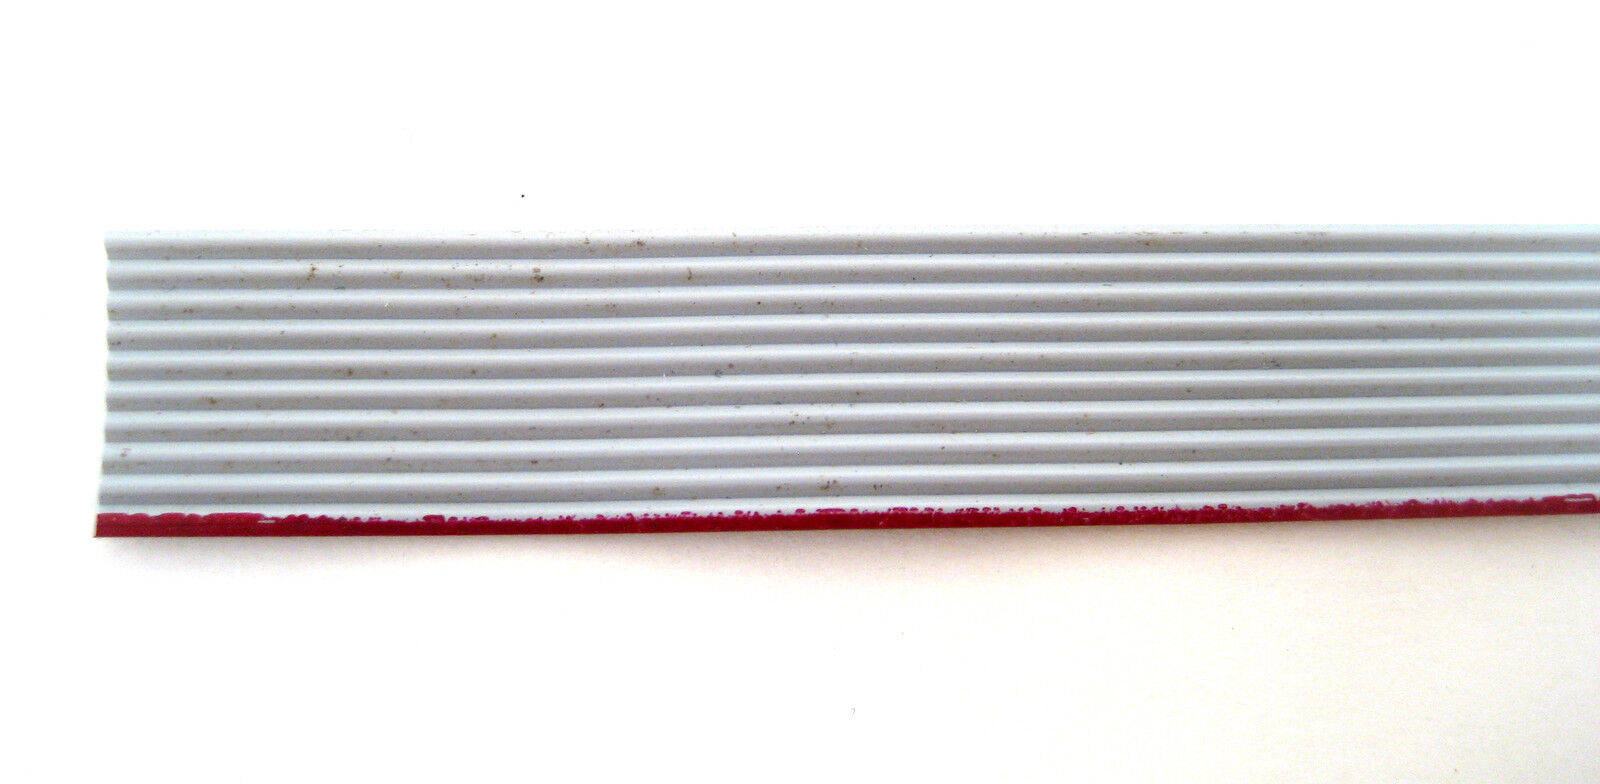 10 Conductor Gray Ribbon Cable: 5 Foot Piece